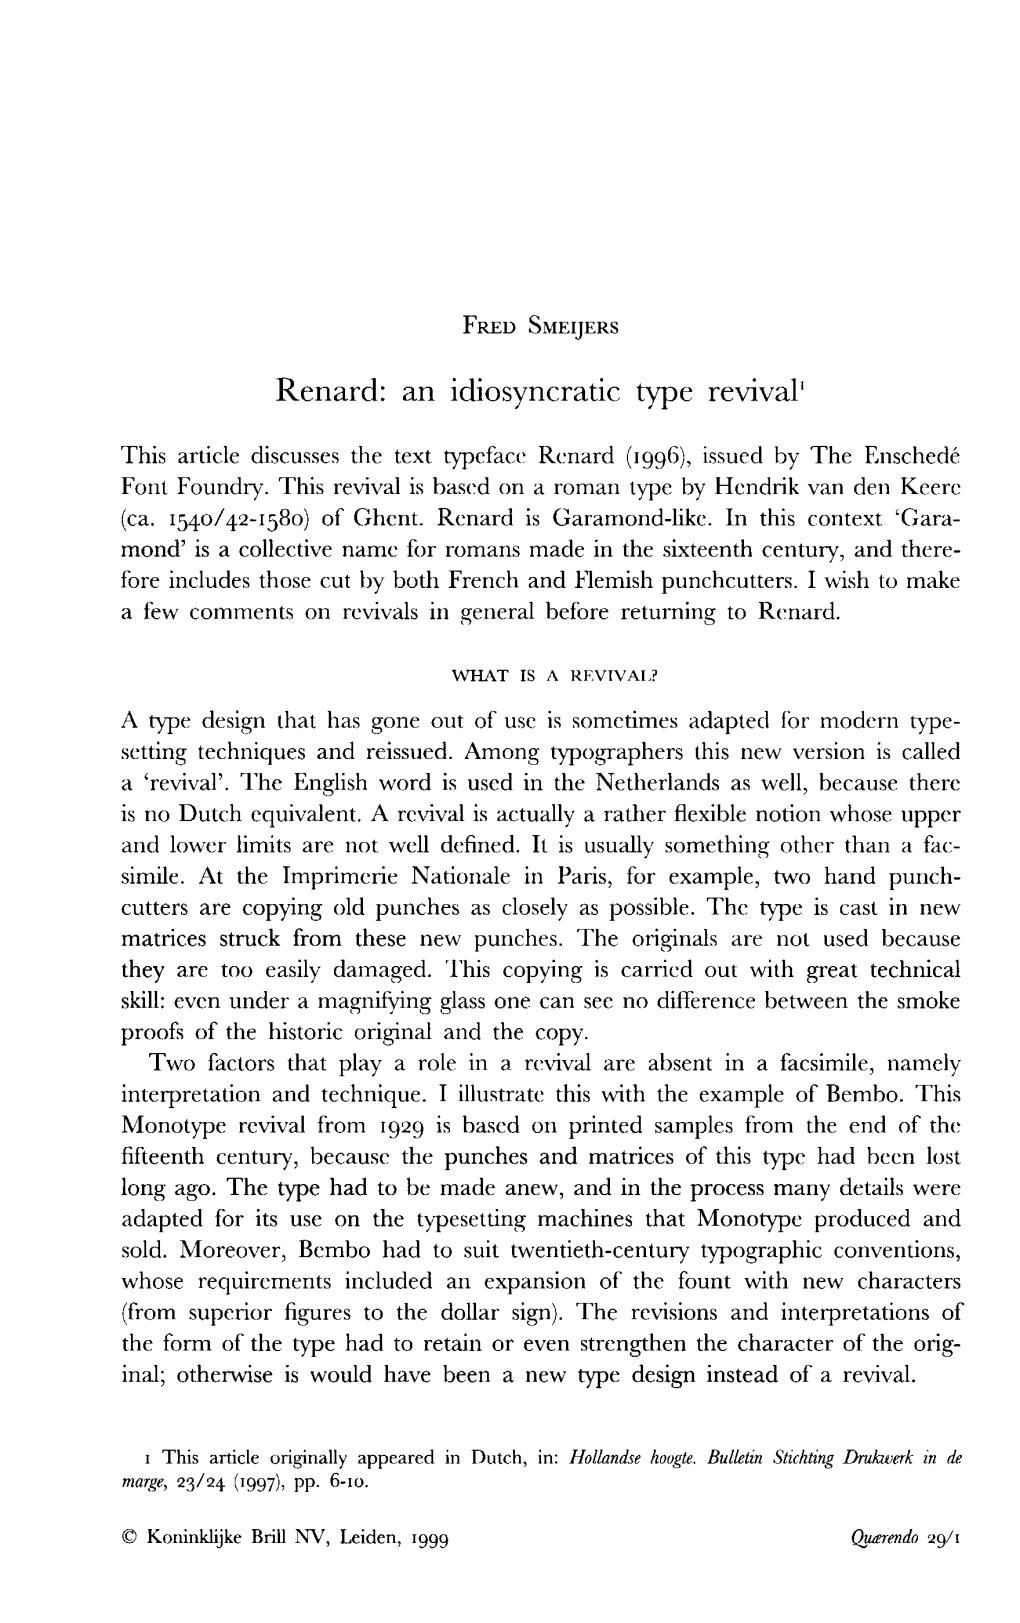 FRED SMEIJERS Renard: an Idiosyncratic Type Revival1 This Article Discusses the Text Typeface Renard (1996), Issued by the Ensch